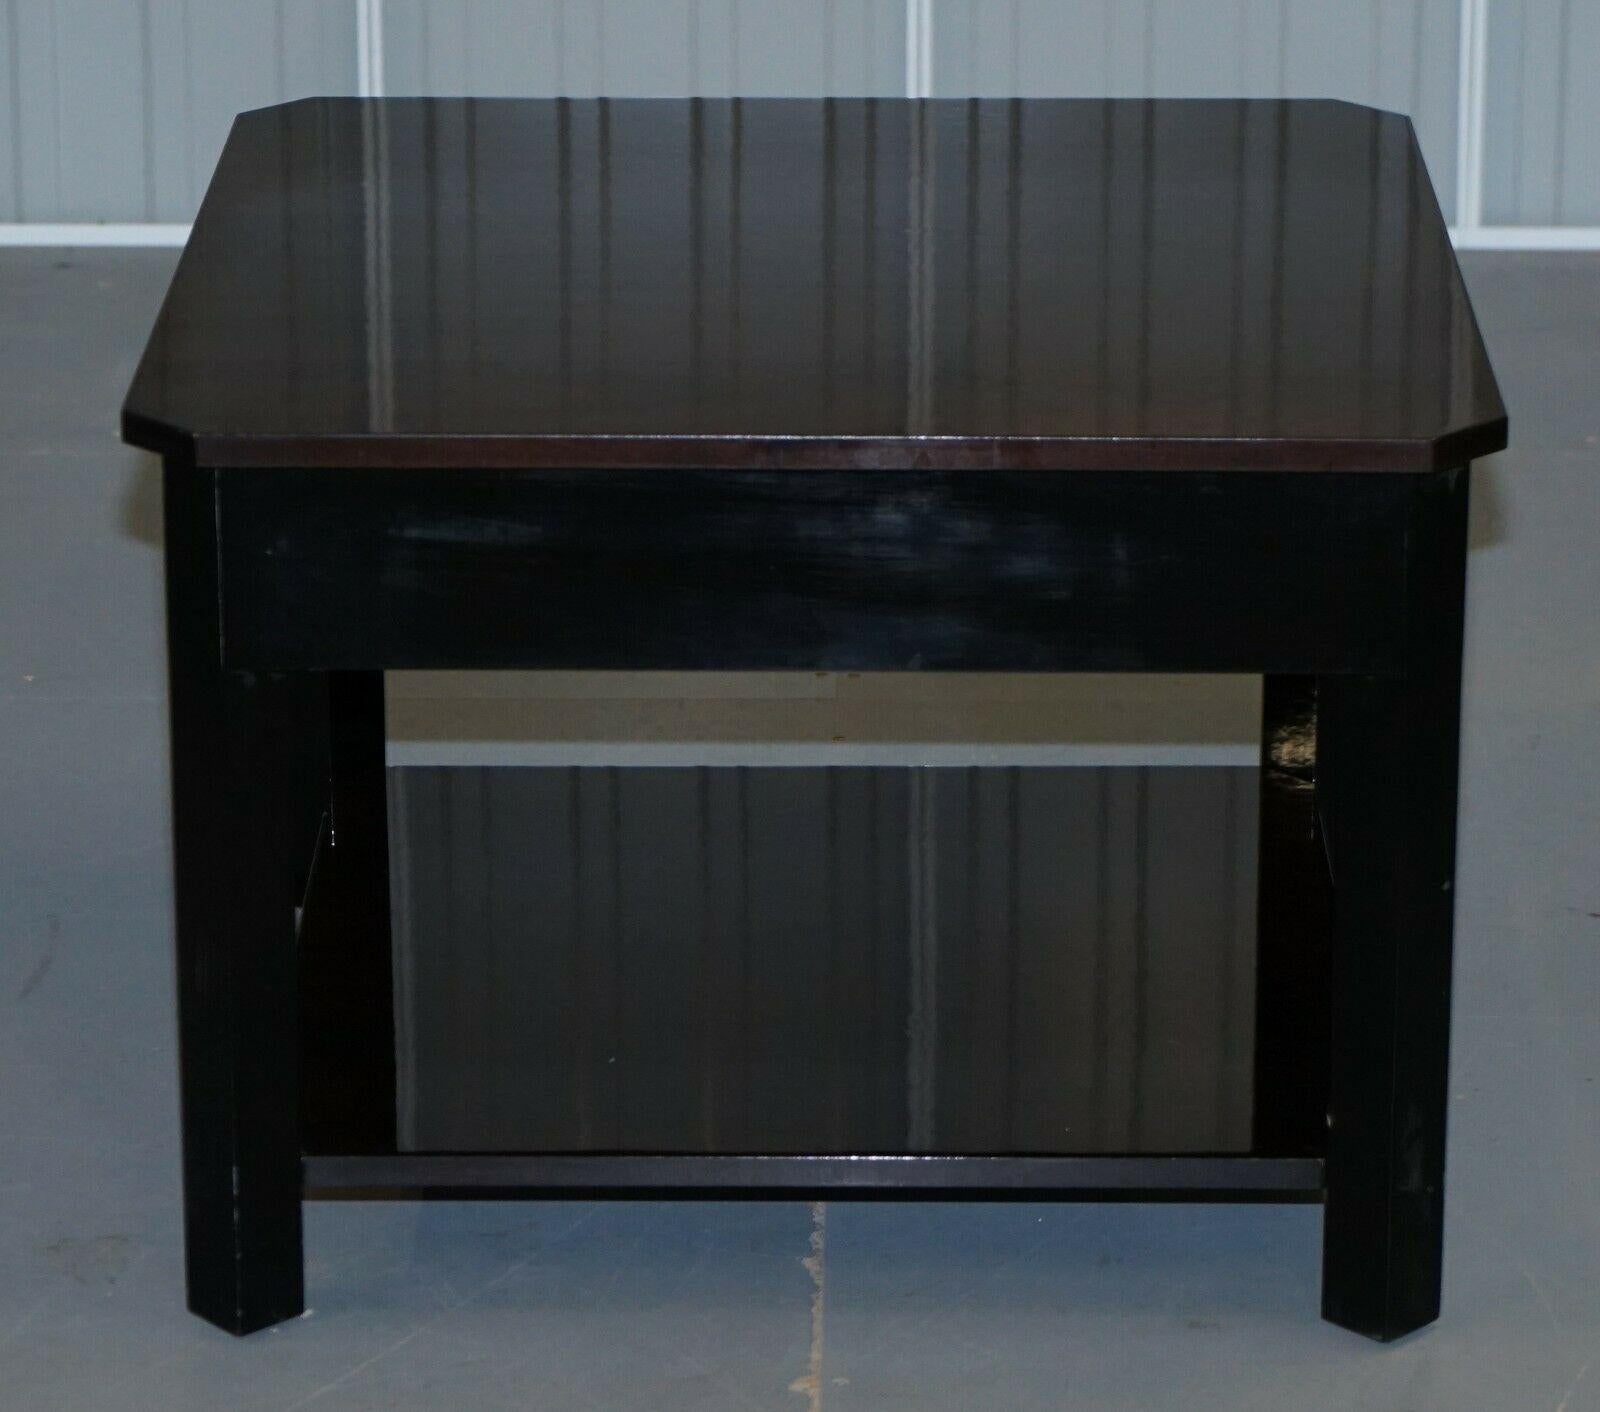 We are delighted to offer for sale this new ex display lovely deep dark Mahogany Bevan Funnell coffee table

This was bought as an ex display piece directly from the Bevan Funnell warehouse, it is new never used however has some light transport